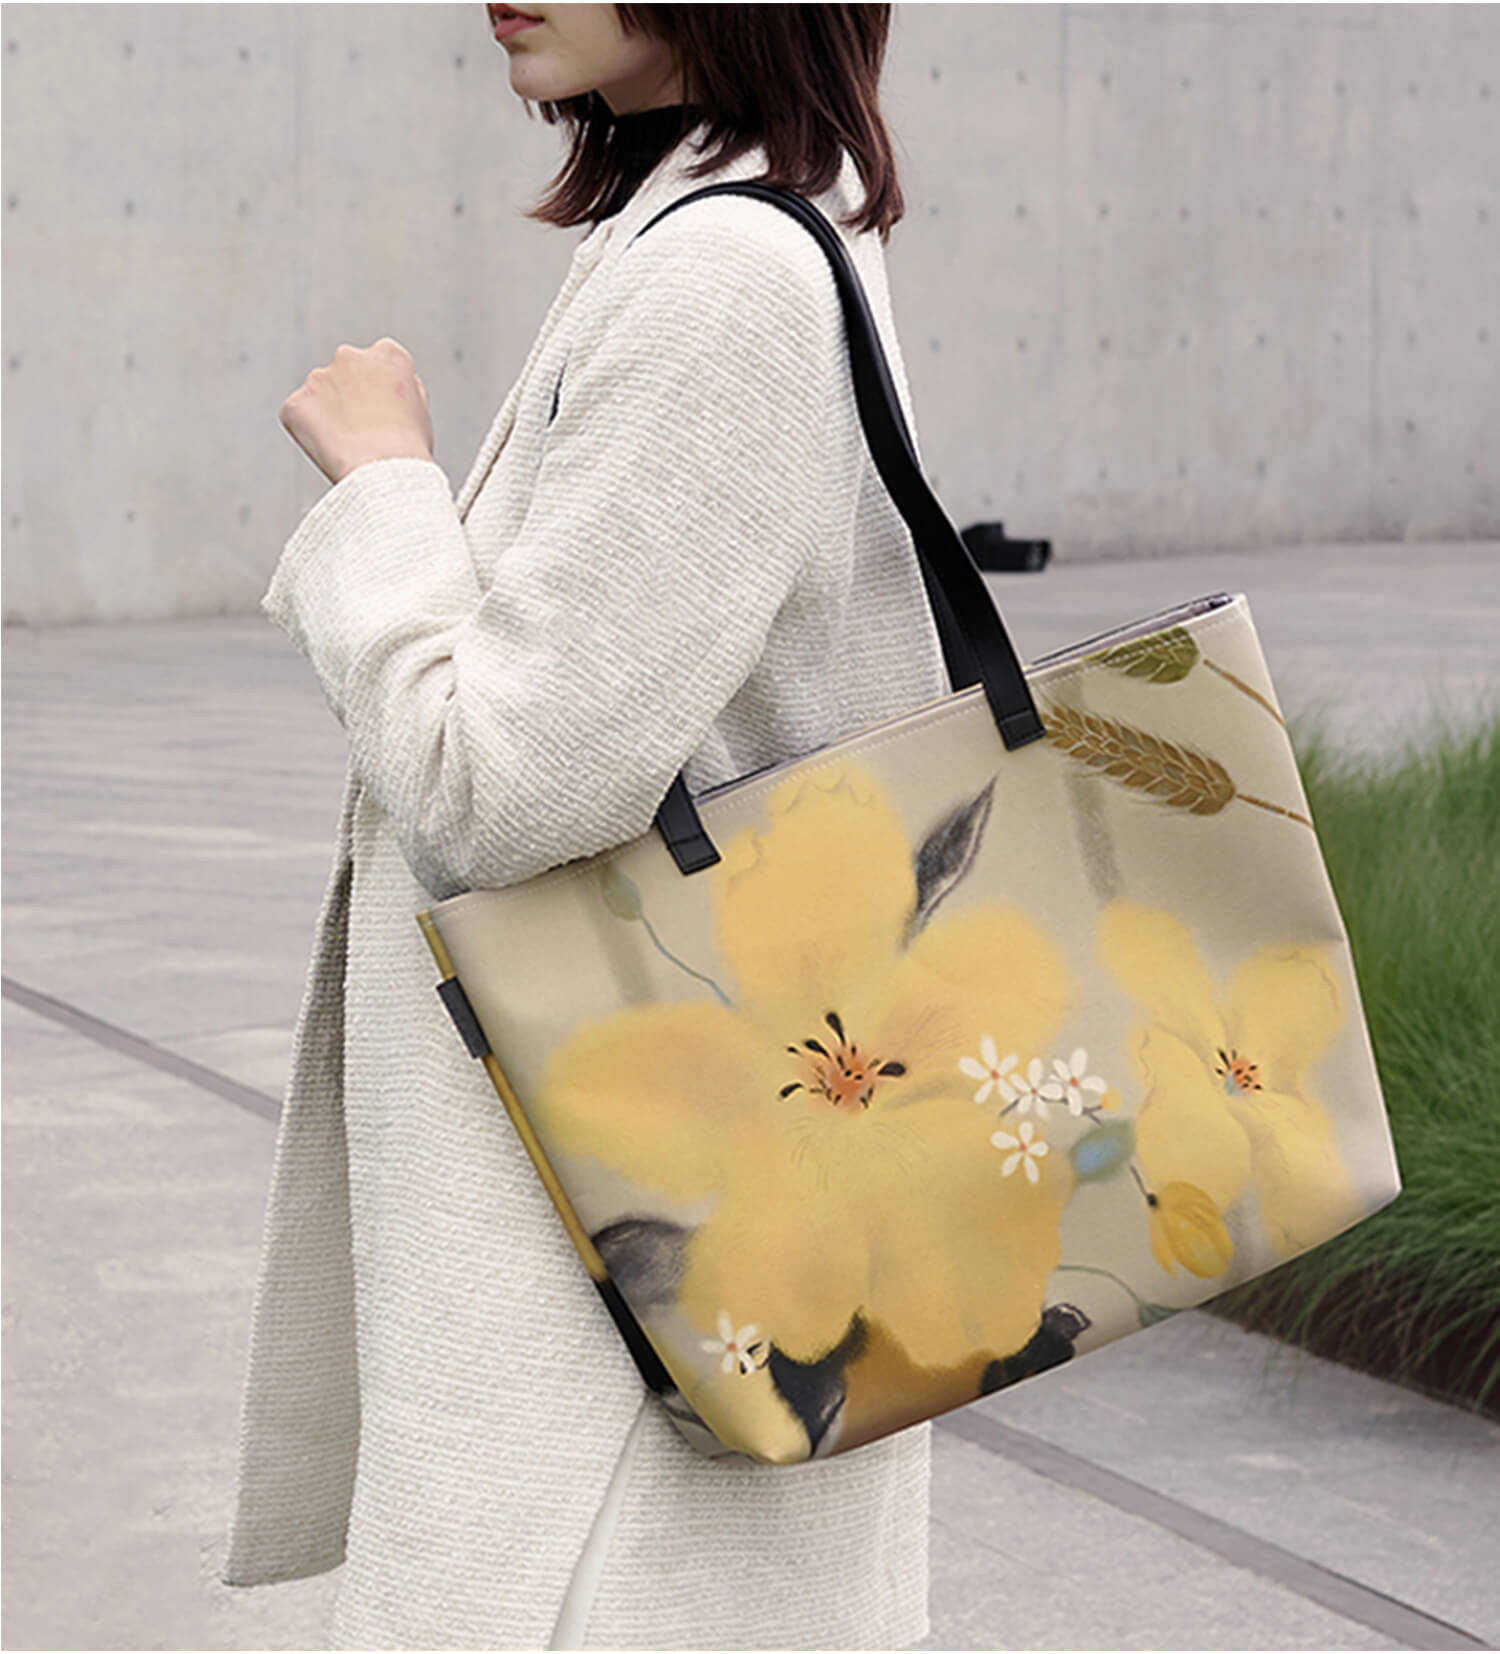 The model carried a digital printed canvas Commuter Bag